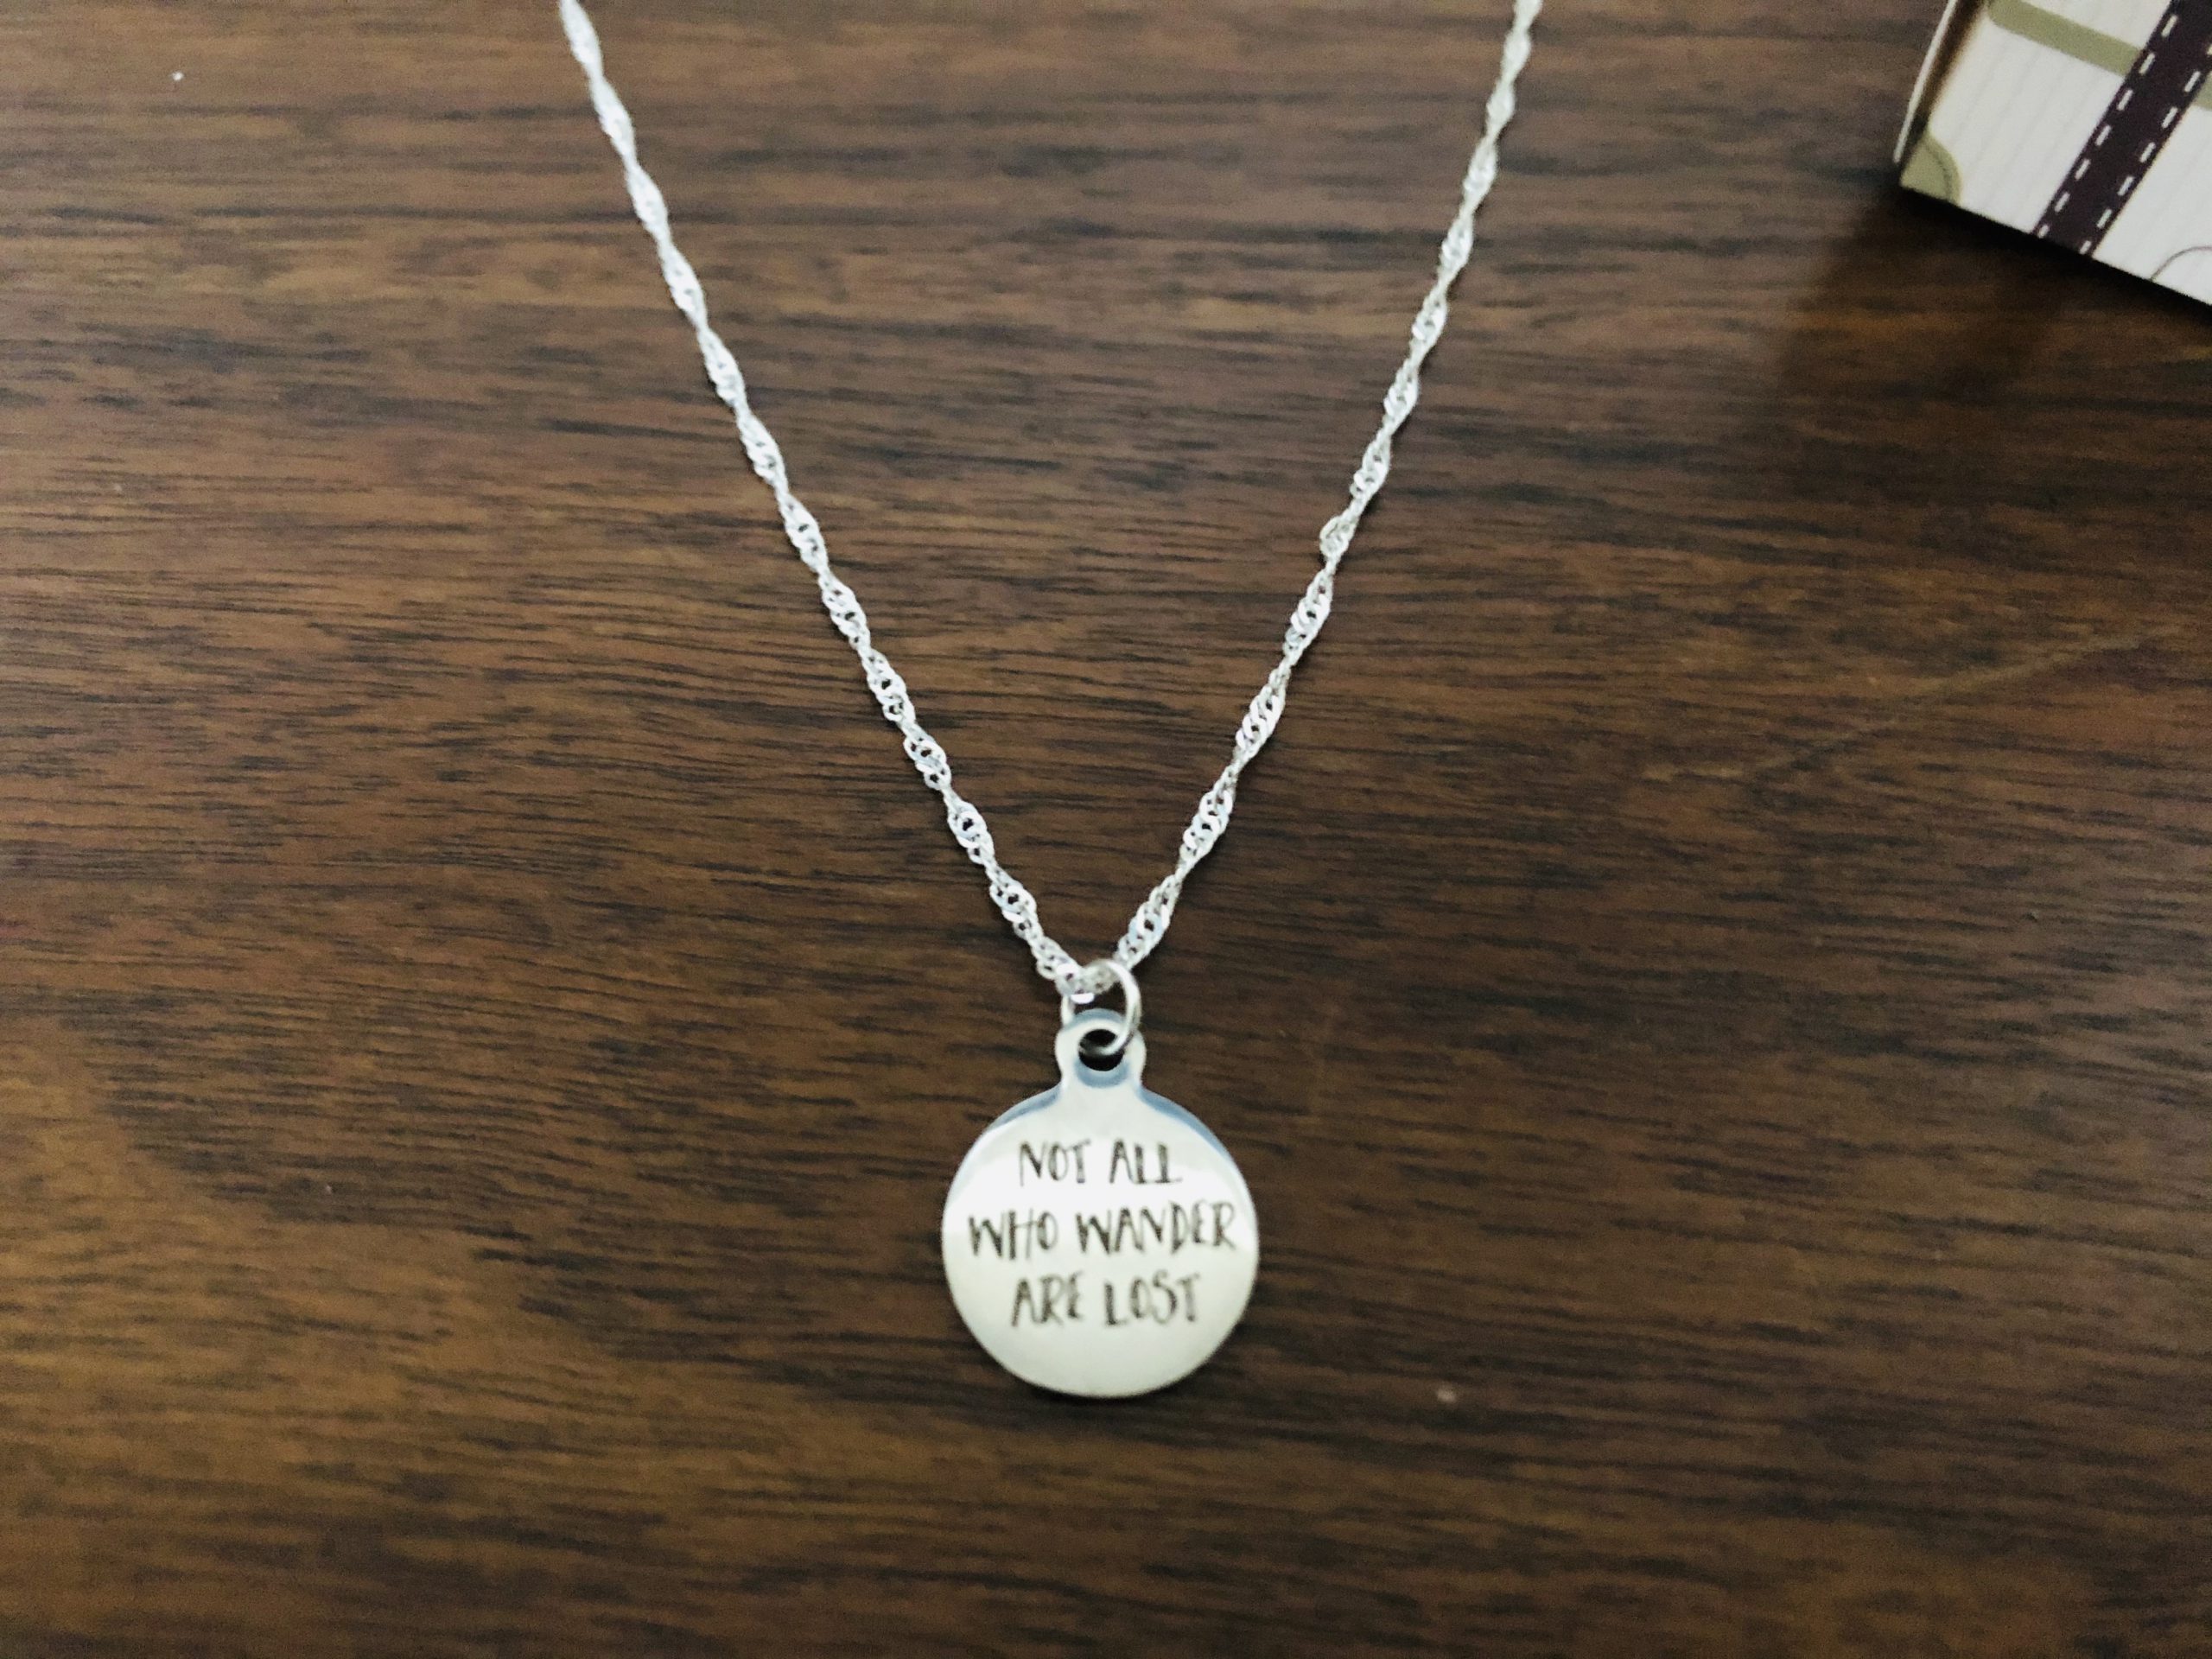 Not All Who Wander Are Lost Necklace - Travel Insider